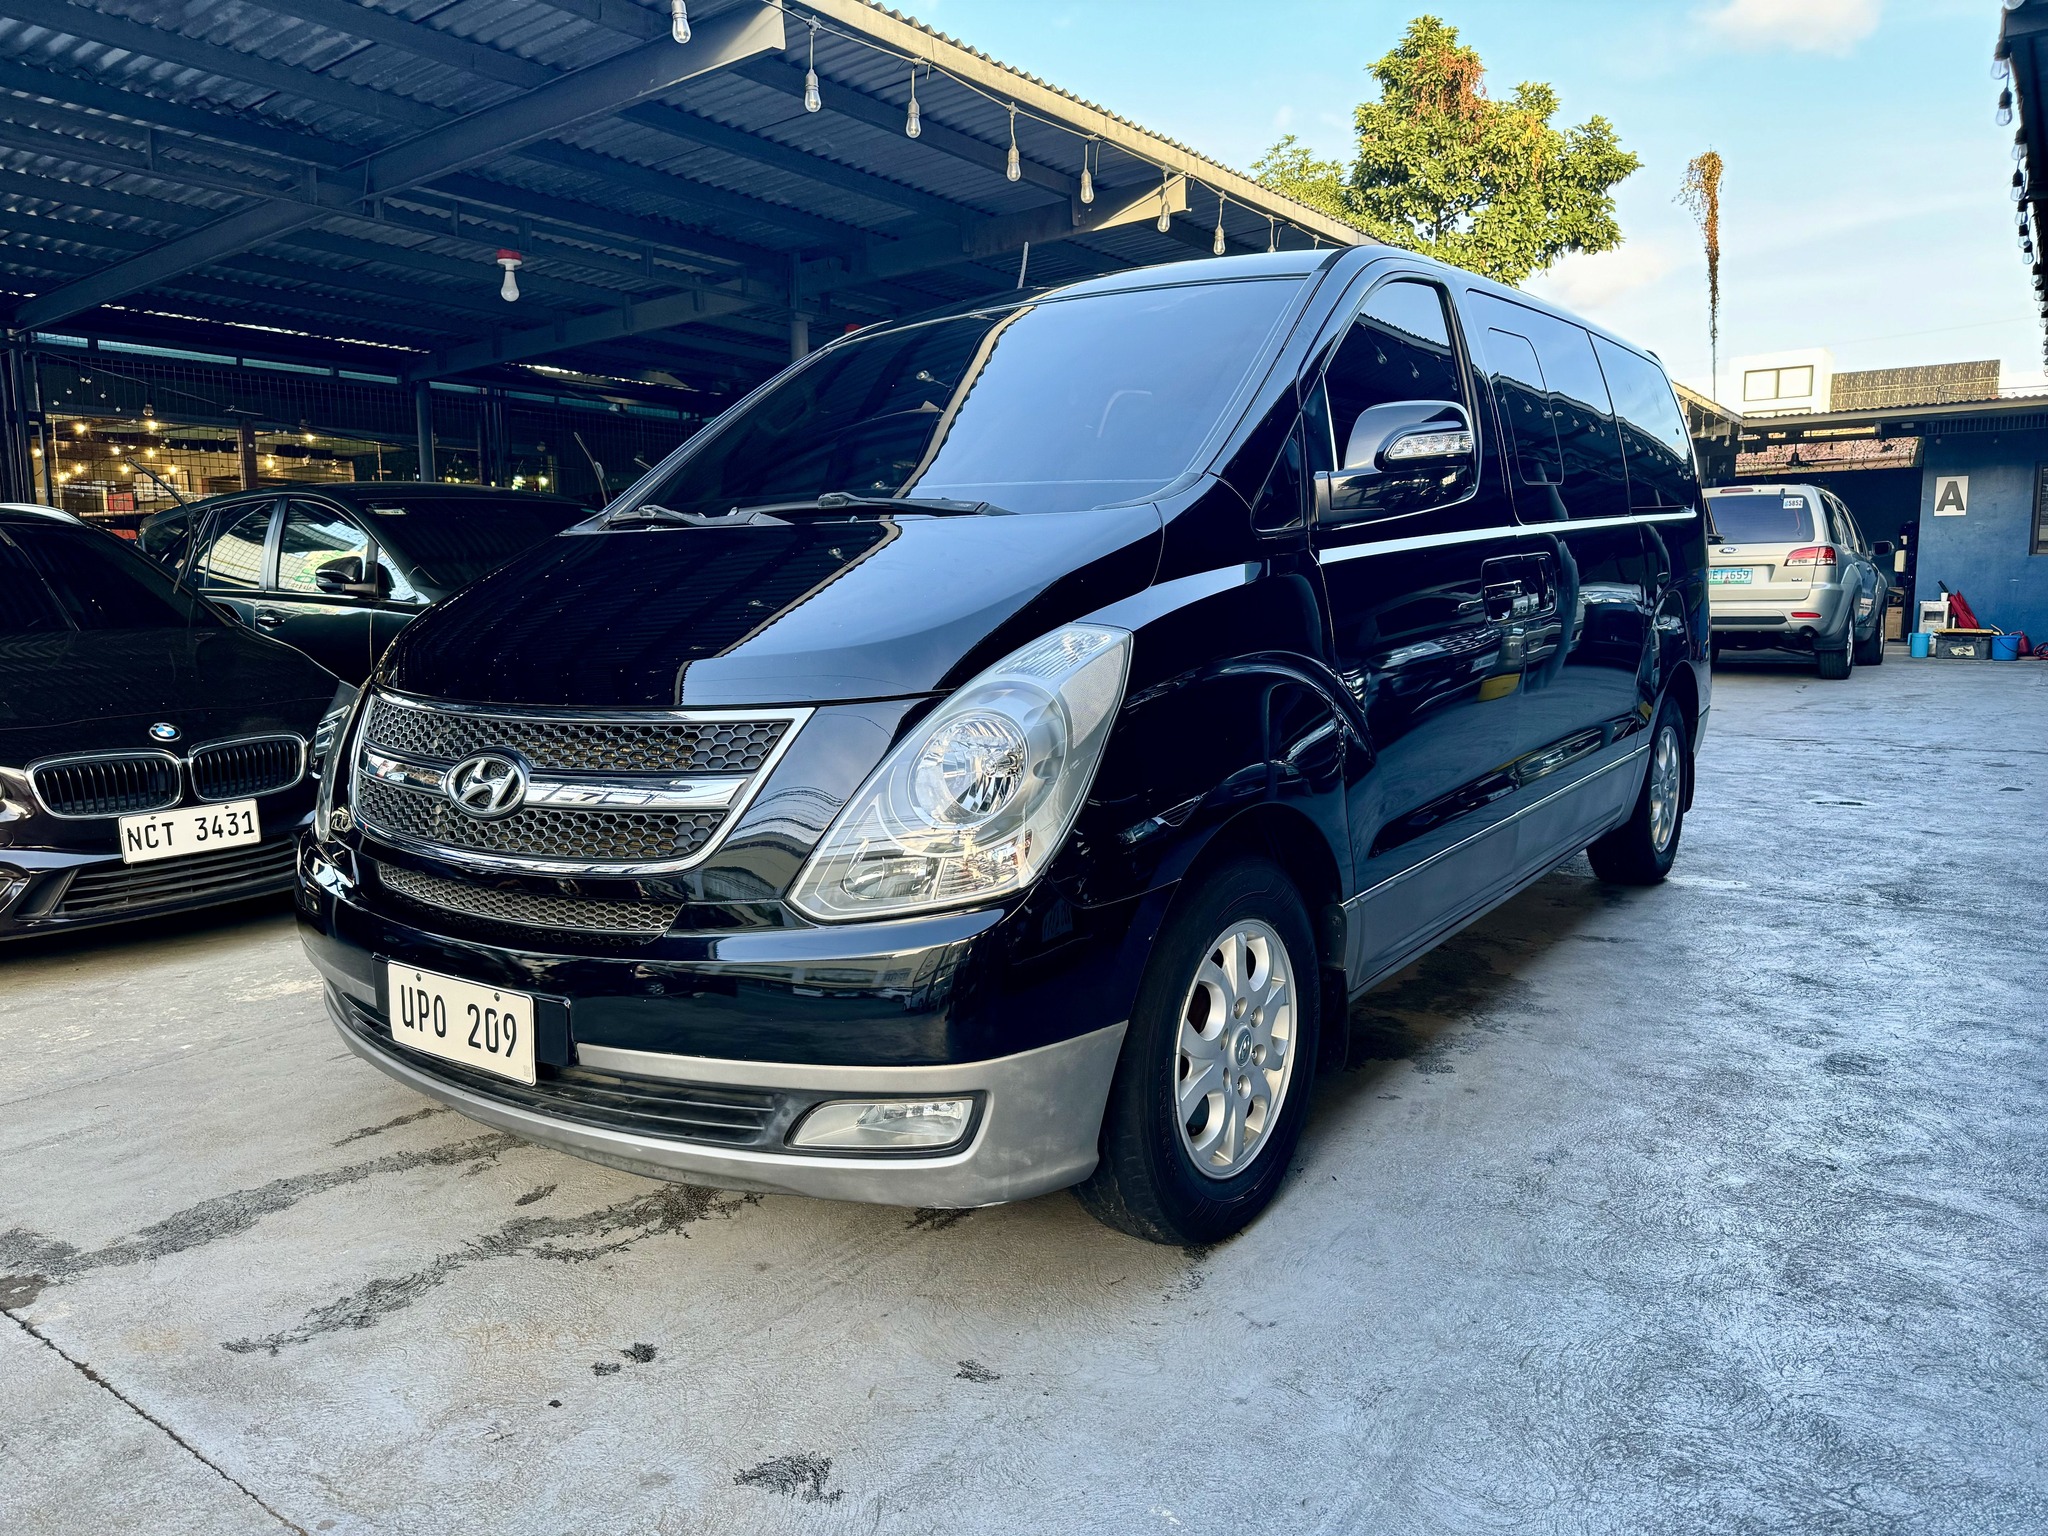 2013 Hyundai Grand Starex VGT GOLD Automatic A/T Turbo Diesel! Flawless Inside and Out!